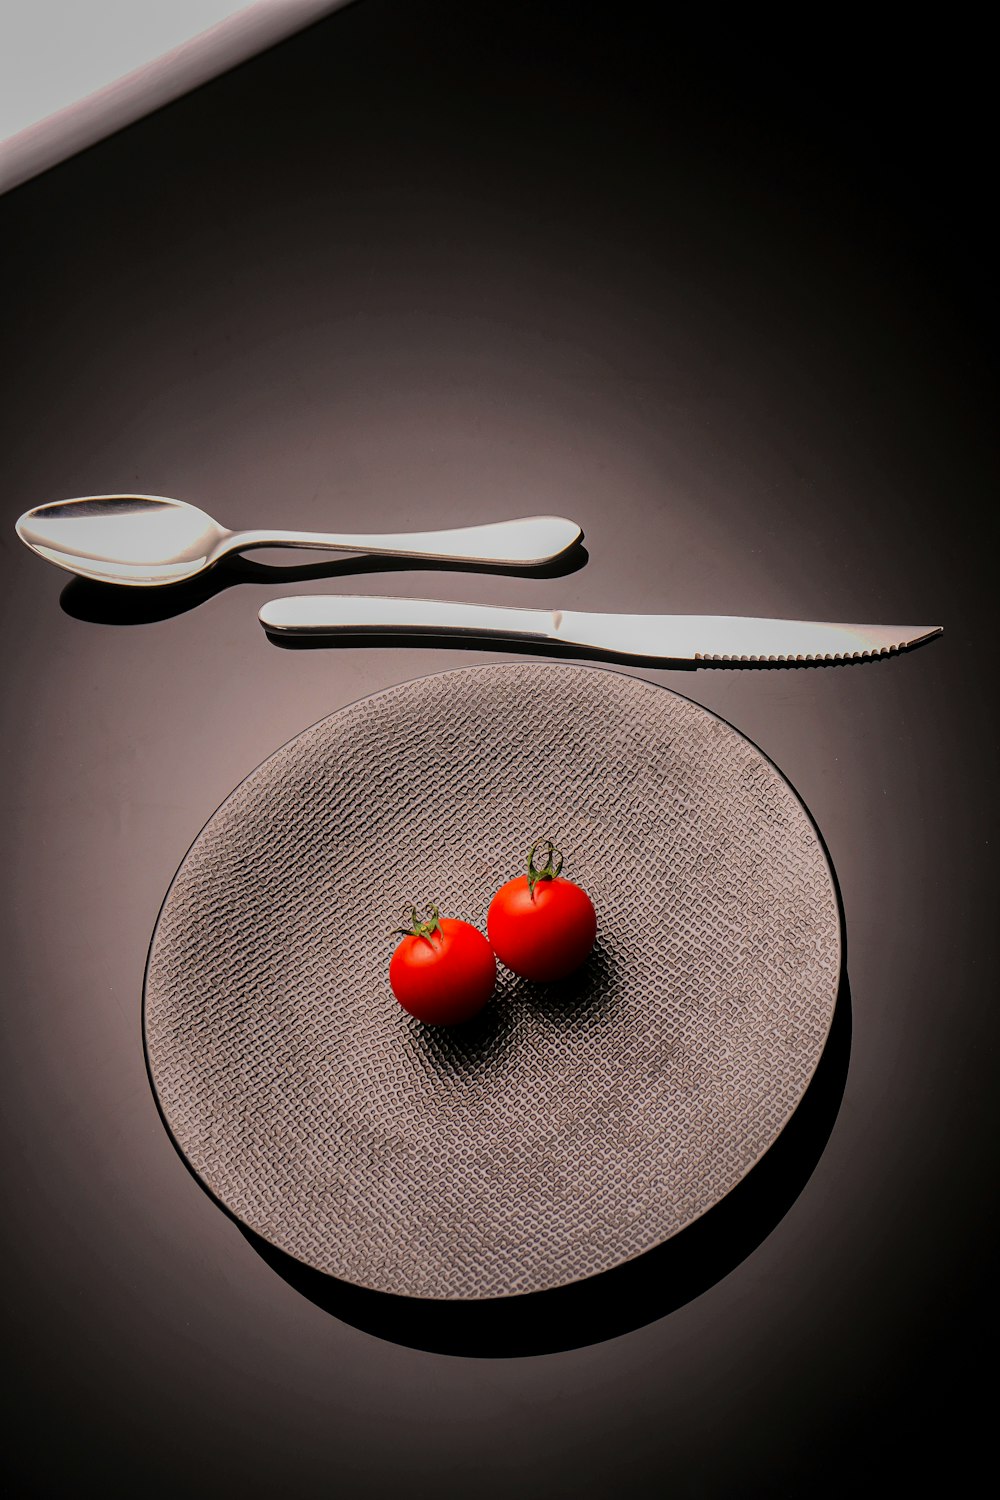 a plate with two tomatoes on it next to a knife and fork